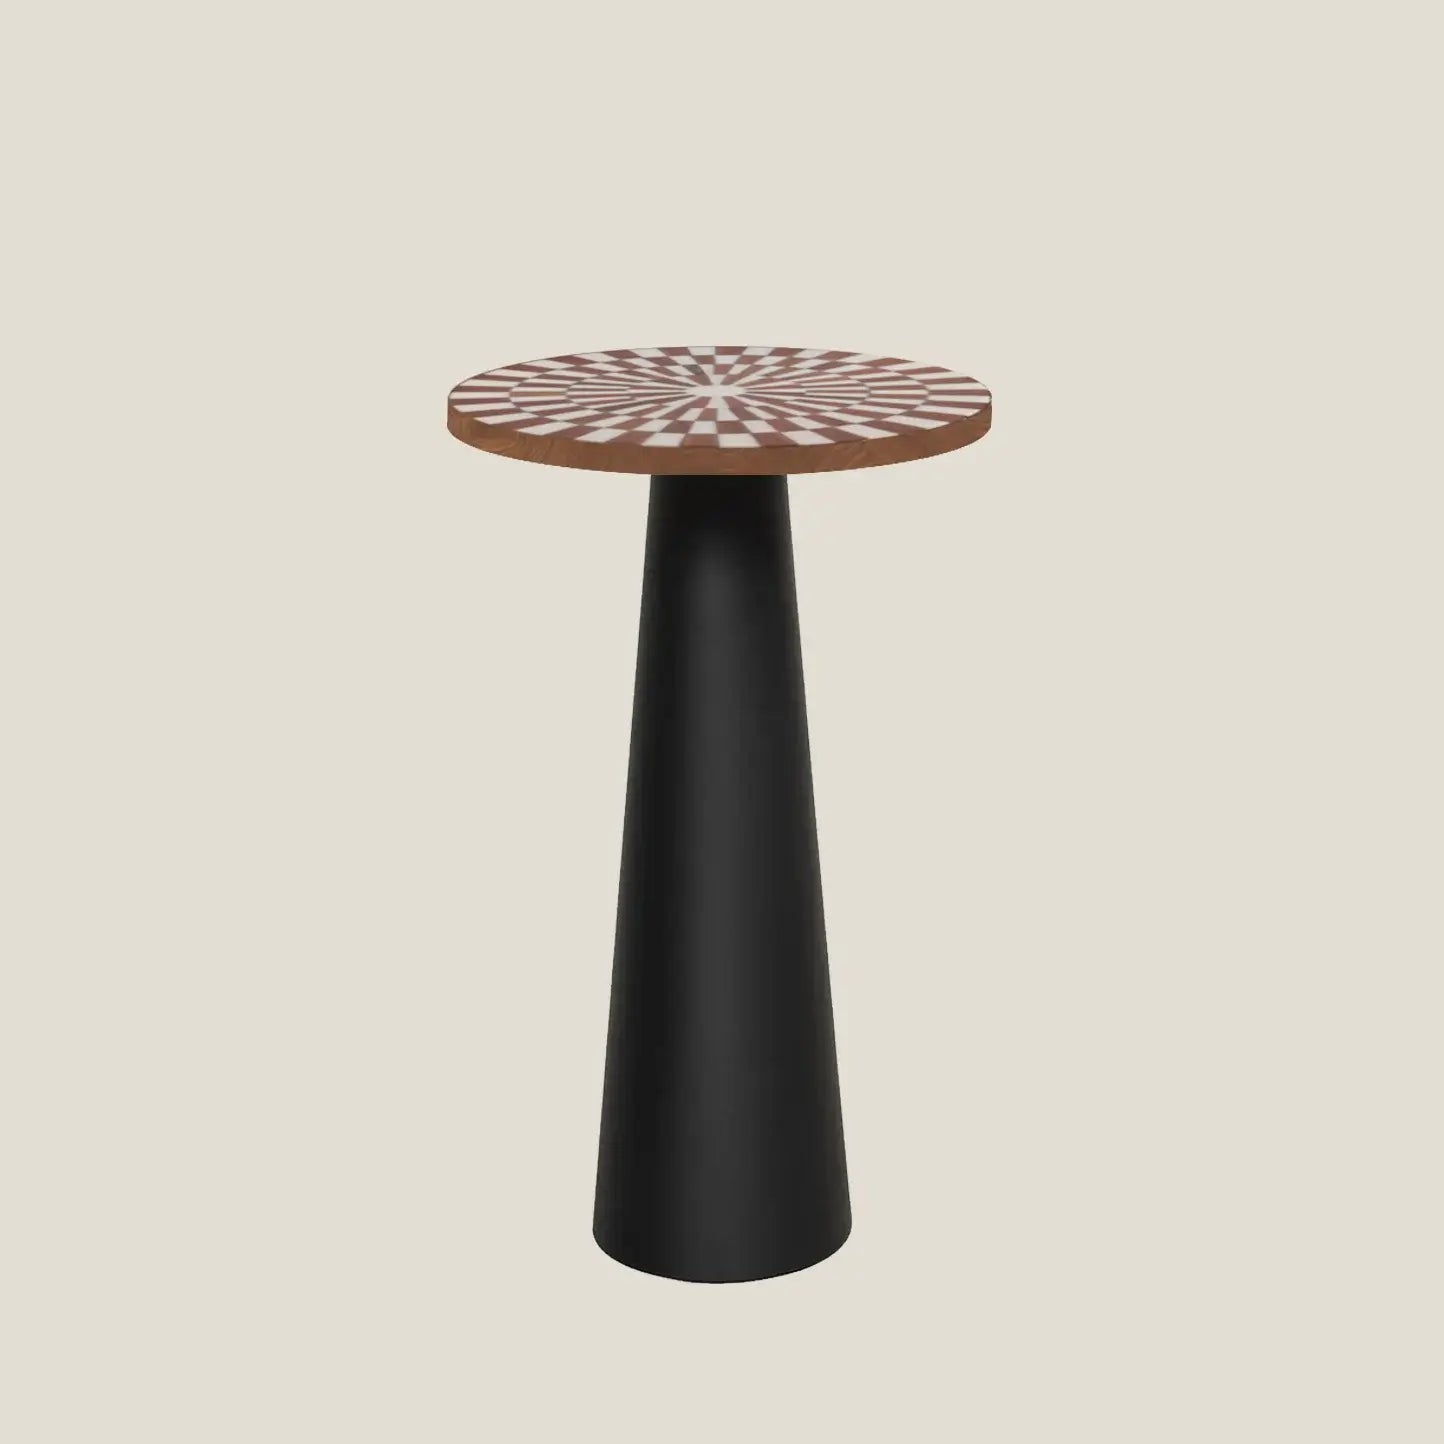 Dounia home Table in Walnut made of Walnut and brass, Model: shaa